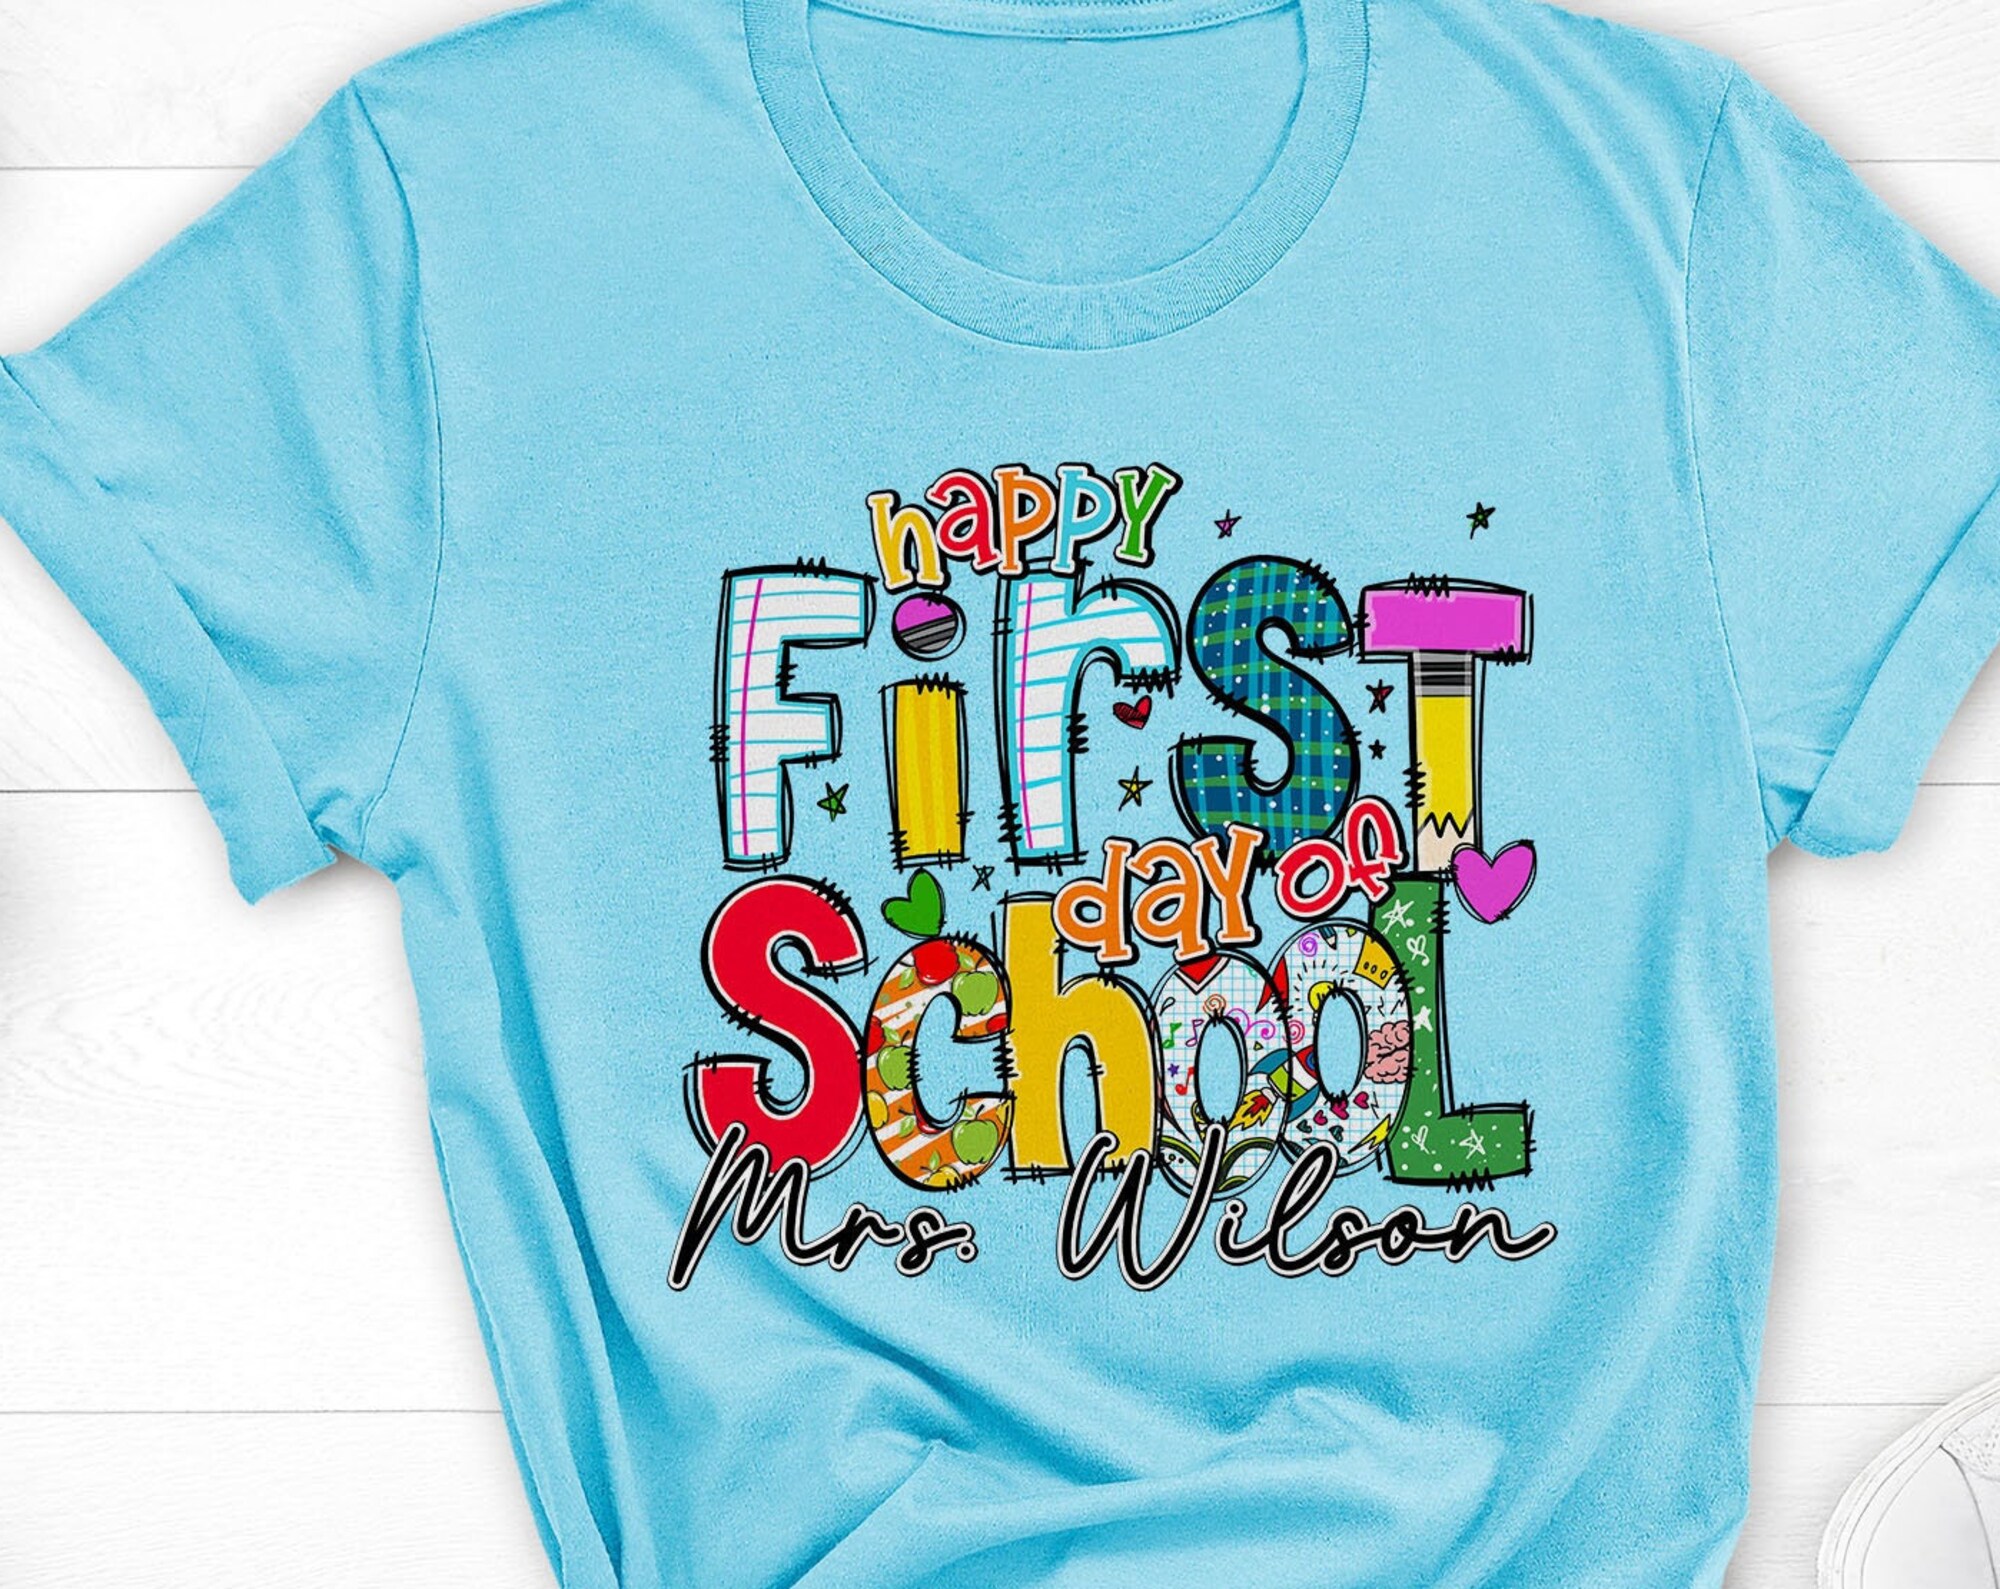 Discover Happy First Day of School Shirt, Back To School Gift, Shirt for Teachers, Kids, Students